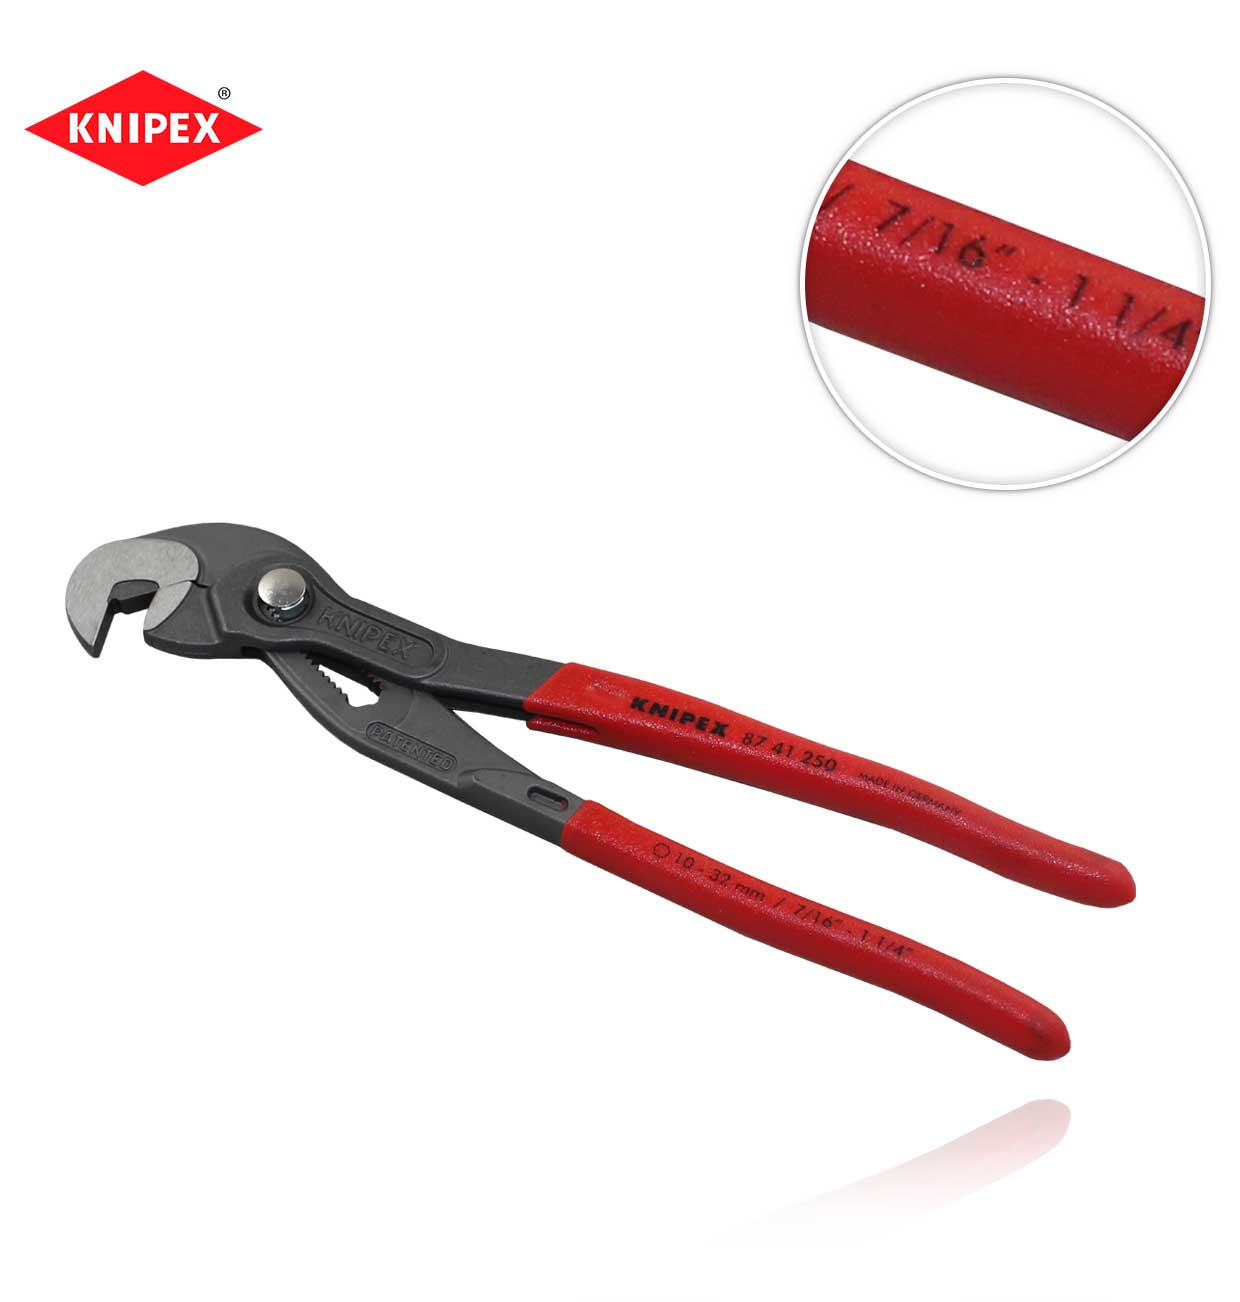 MULTI-ADJUSTABLE SPANNER for hexagonal screws and nuts (10-32mm)